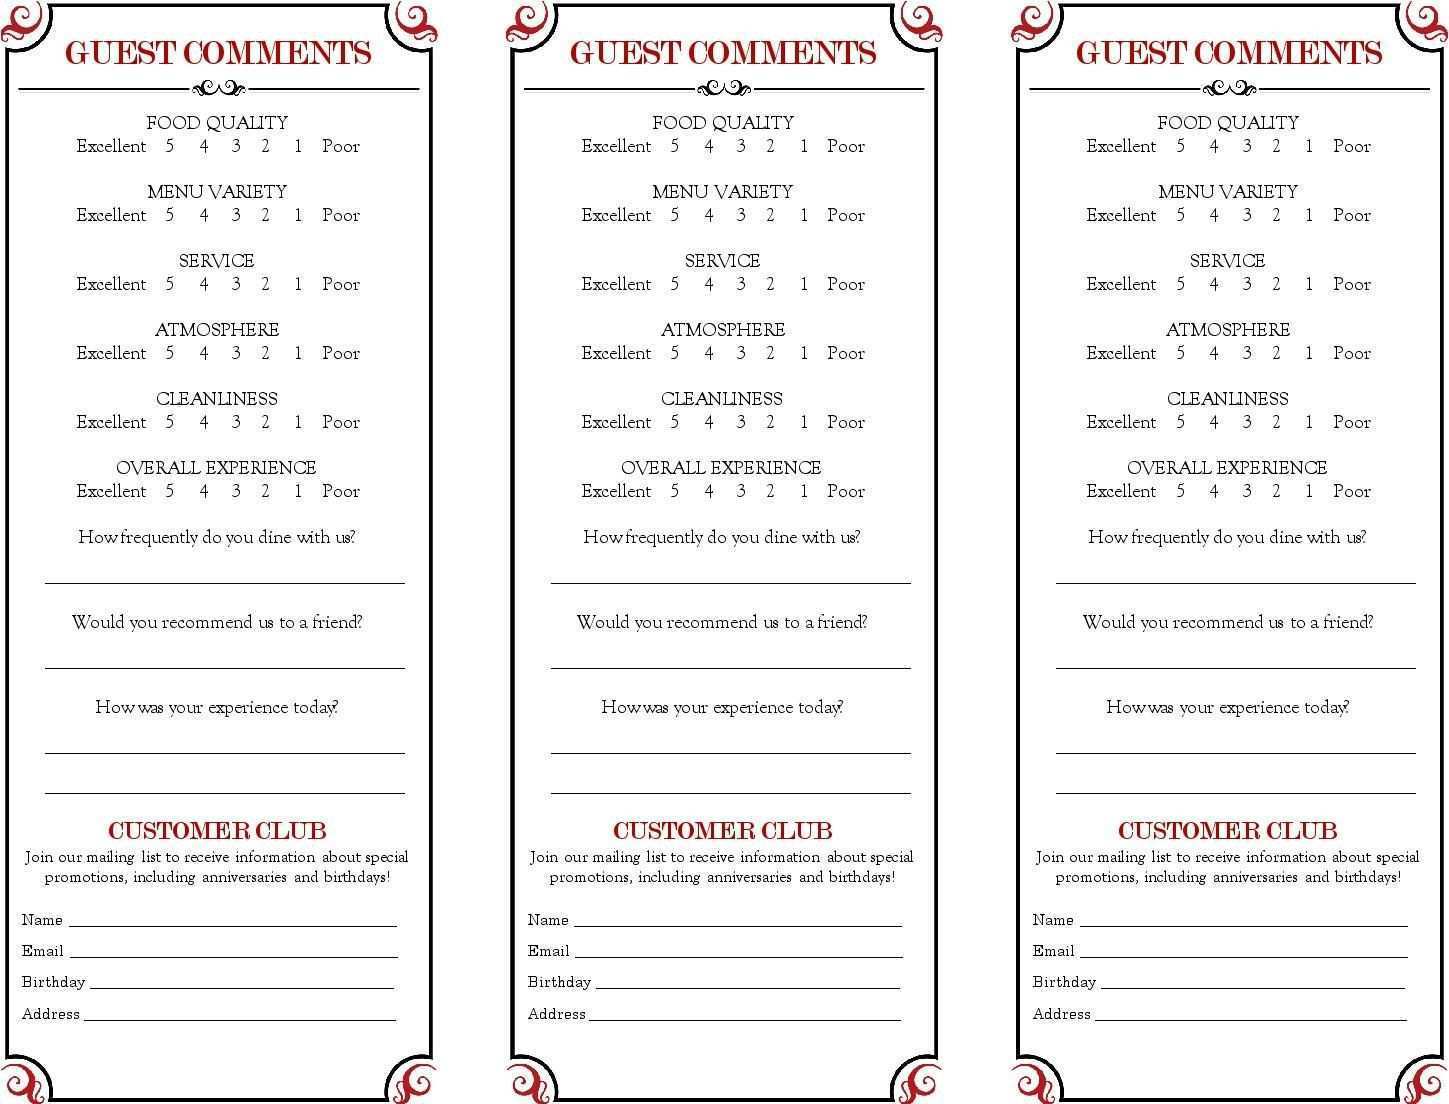 23 Adding Comment Card Template Restaurant Free PSD File with Comment Card Template Restaurant Free